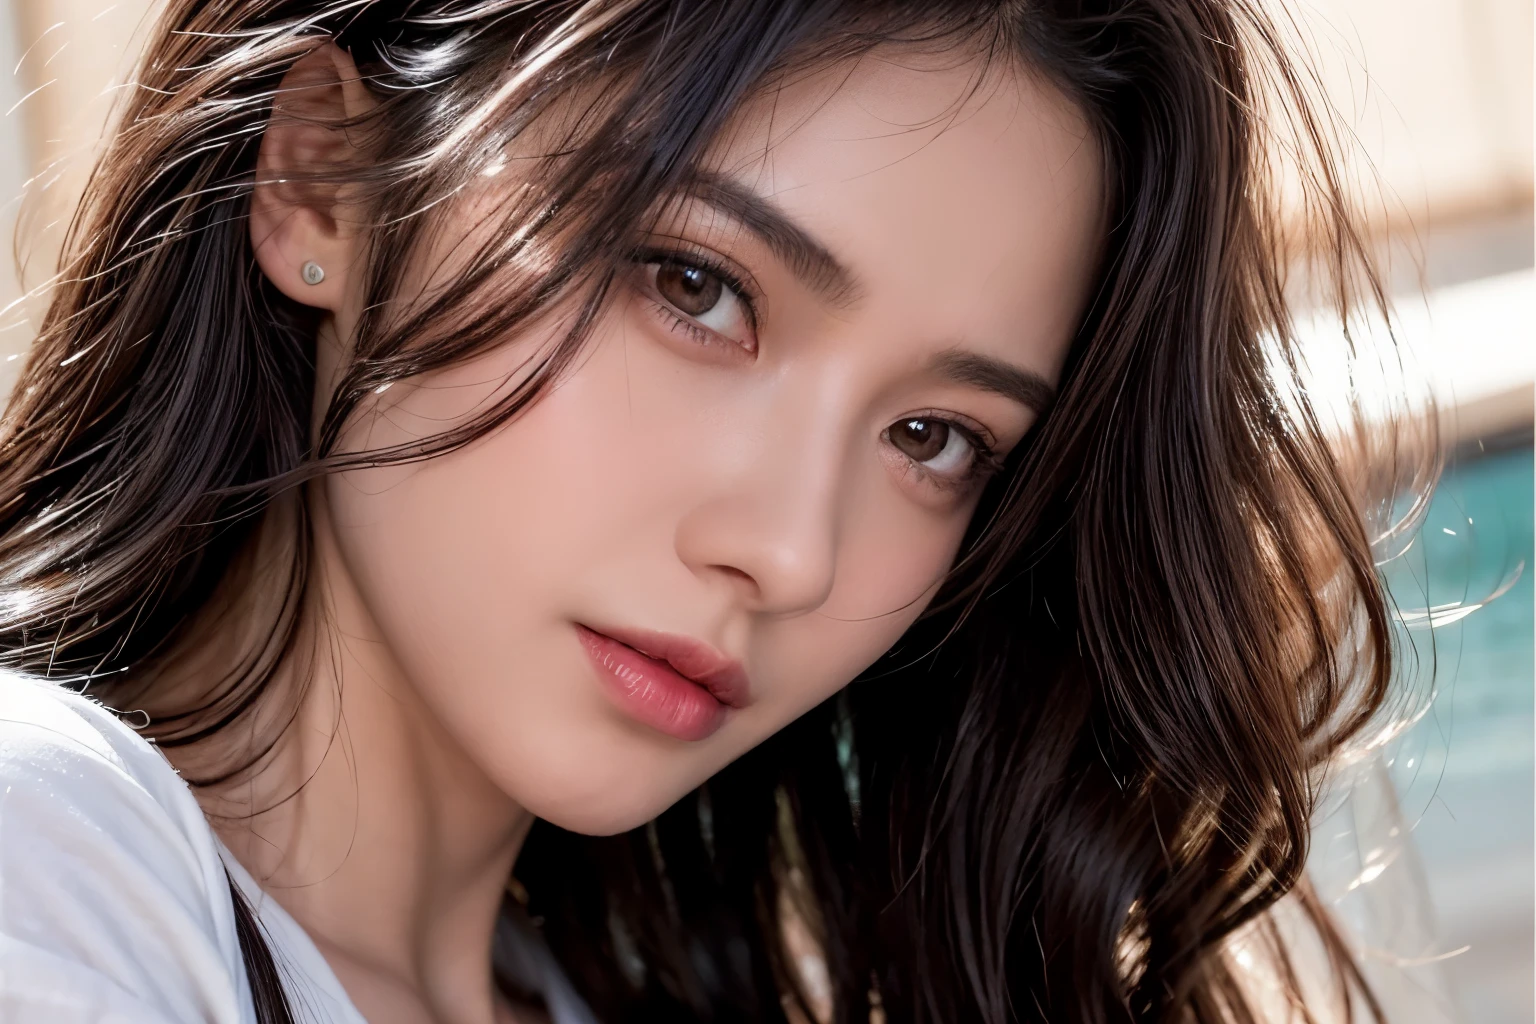 top-quality、hight resolution、​masterpiece:1, pretty woman, messy long black hair styled in loose waves, olhos castanhos, olho detalhado, feliz, lips, rostos detalhados limpos, roupas intracate, white shirt, sombras brilhantes, gradiente bonito, profundidade de campo, imagem limpa, alta qualidade, alto detalhe, highes definition, Luminous Studio graphics engine, rosto bonito, finely detailed eyes, finely detailed face, finely quality eyes, (tired and sleepy and satisfied:0.0), t-shirts, (Increase body line mood:1.1), (Increase skin texture beauty:1.1) smooth abs